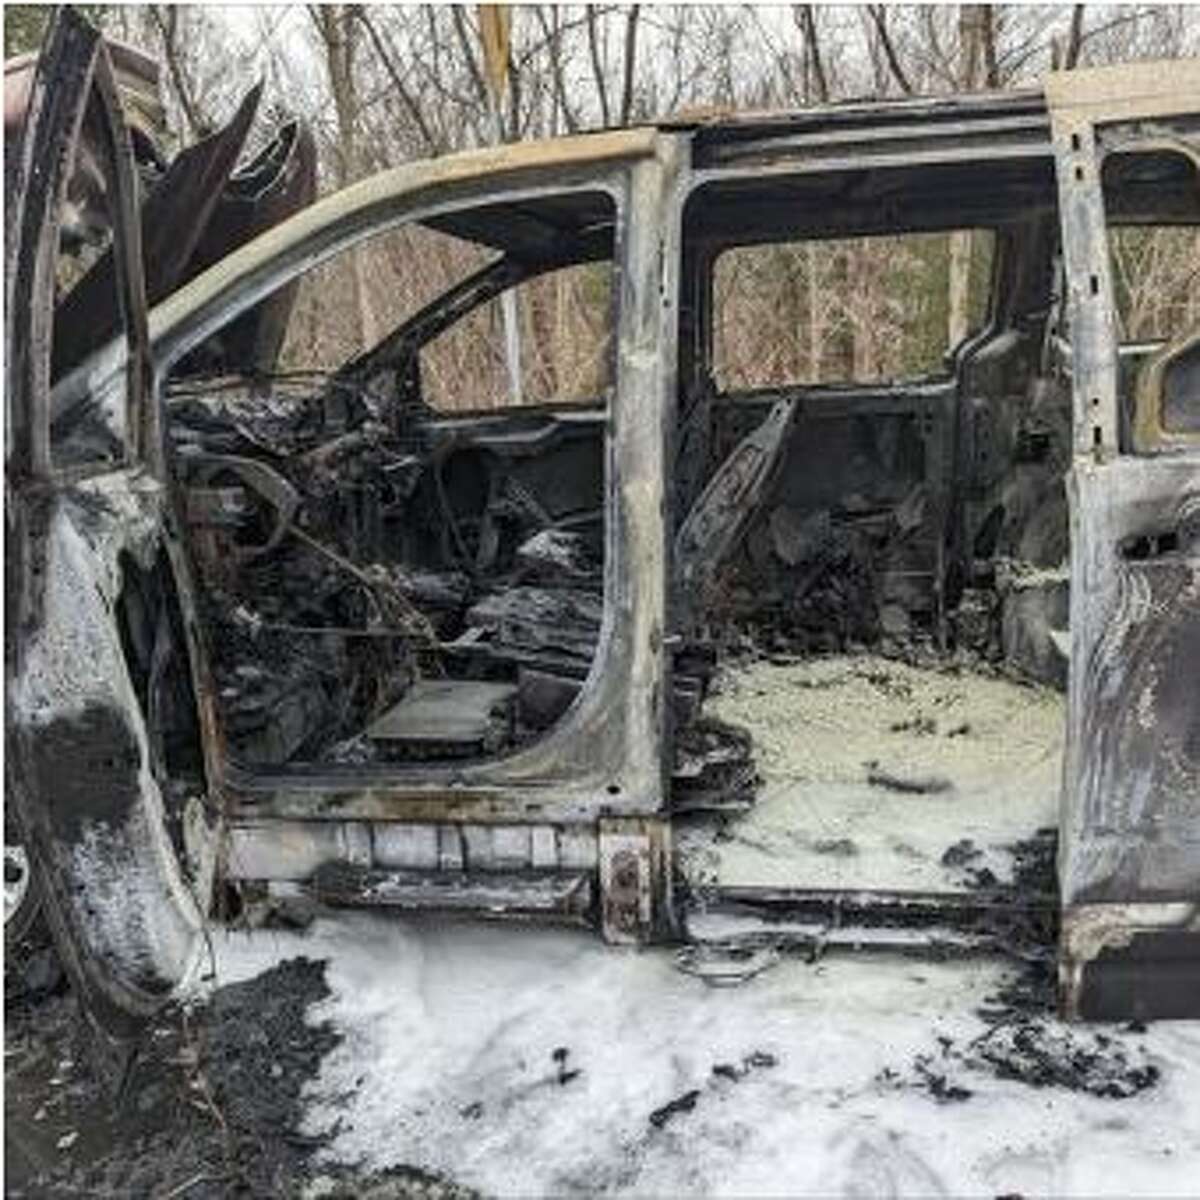 Heather Sica Leonard, a teacher at Illing Middle School, helped a disabled man from a burning van in Manchester Thursday, fire officials say. This is what the van looked like after it burned. 